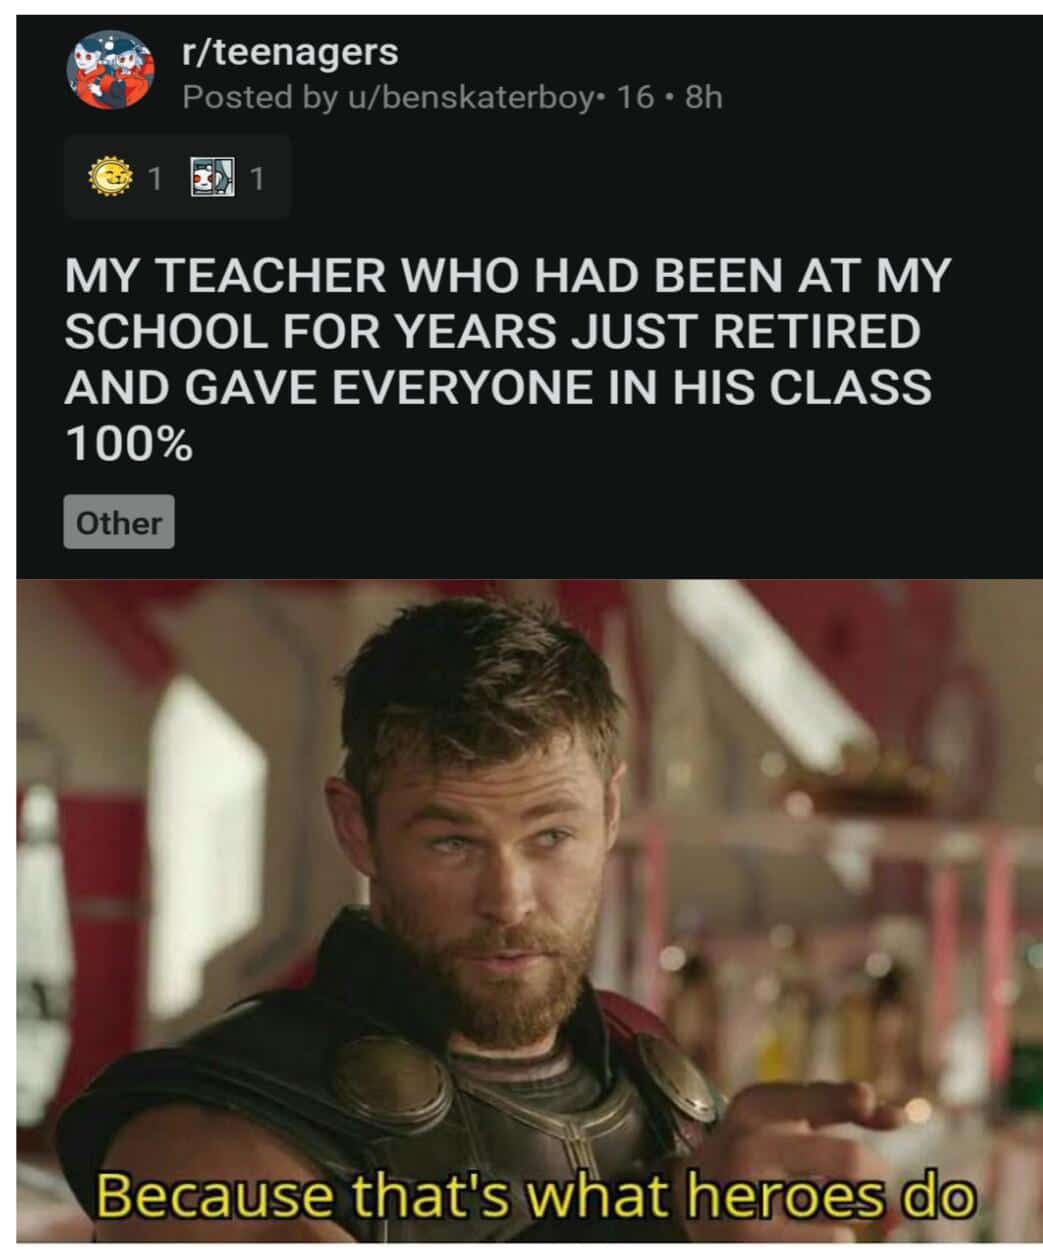 Dank, Odin other memes Dank, Odin text: r/teenagers Posted by u/benskaterboy• 16 • 8h MY TEACHER WHO HAD BEEN AT MY SCHOOL FOR YEARS JUST RETIRED AND GAVE EVERYONE IN HIS CLASS 100% Other ÄBecausethat's what hero* 